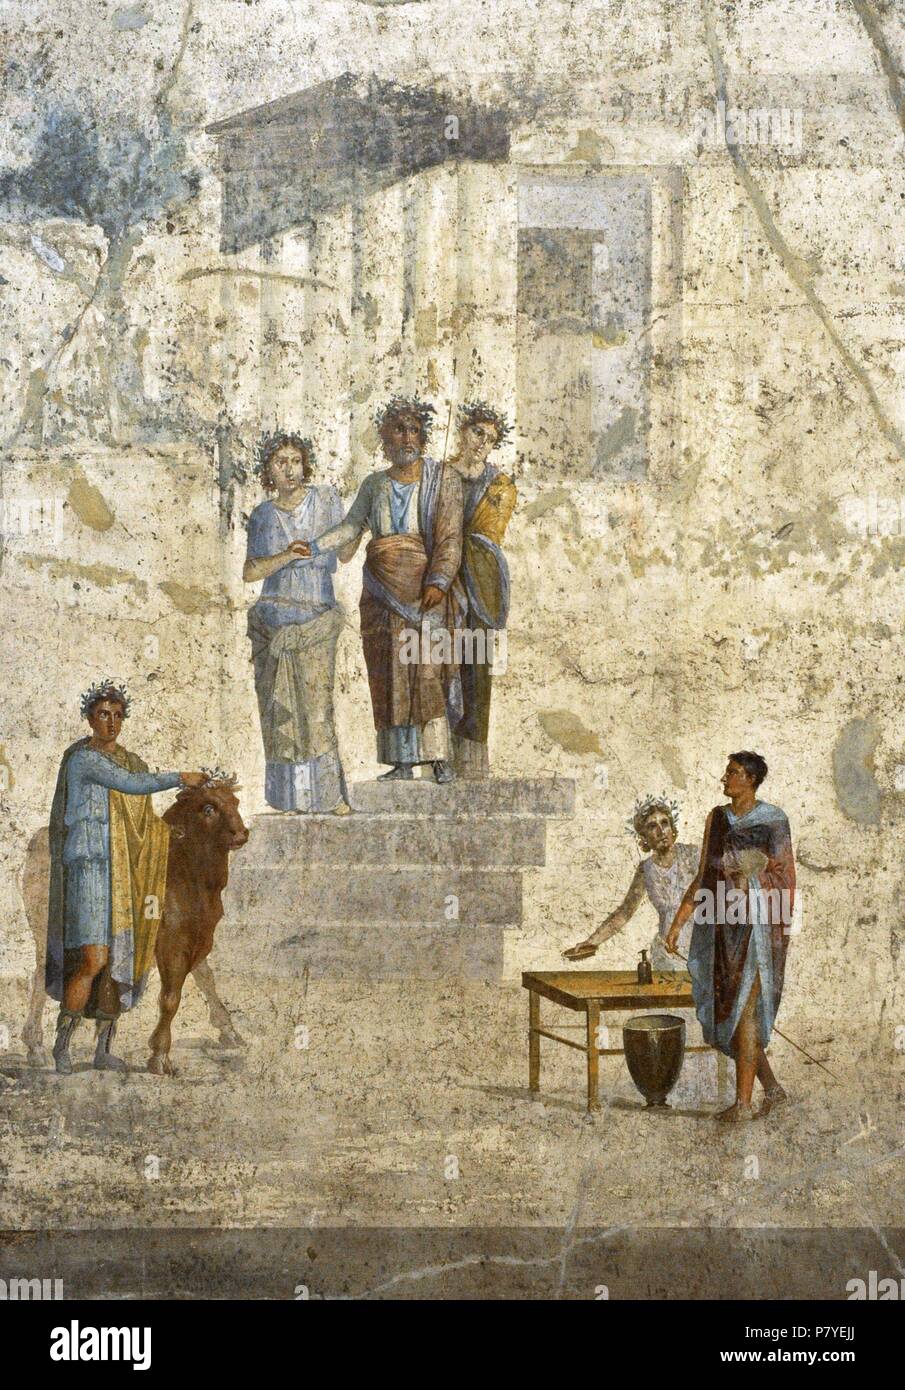 Roman fresco depicting the encounter between Pelias and Jason. Pelias, king of Iolcos, standing on the steps of a temple recognises Jason by his missing sandal. House of Jason (20-25 AD). Pompeii. National Archaeological Museum. Naples. Italy. Stock Photo